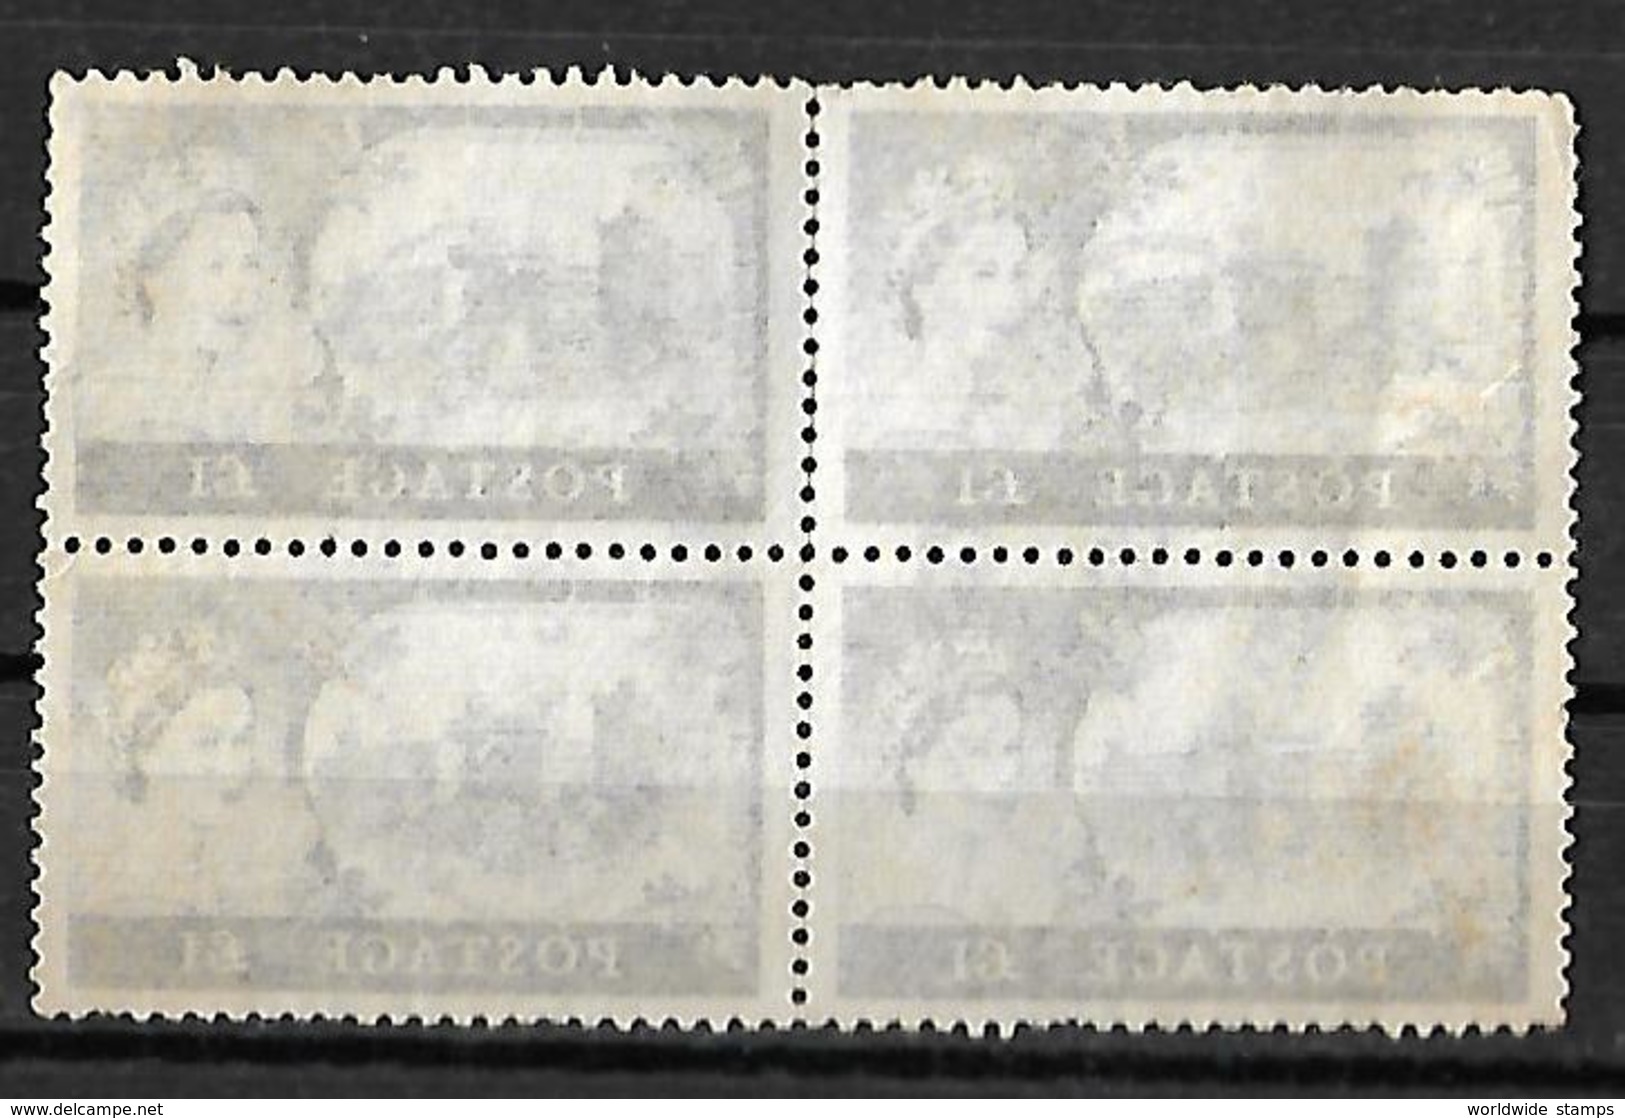 Great Britain 1959 £1 Wilding Castle  Block Of 4 England  High Value Used Stamps - Nuovi